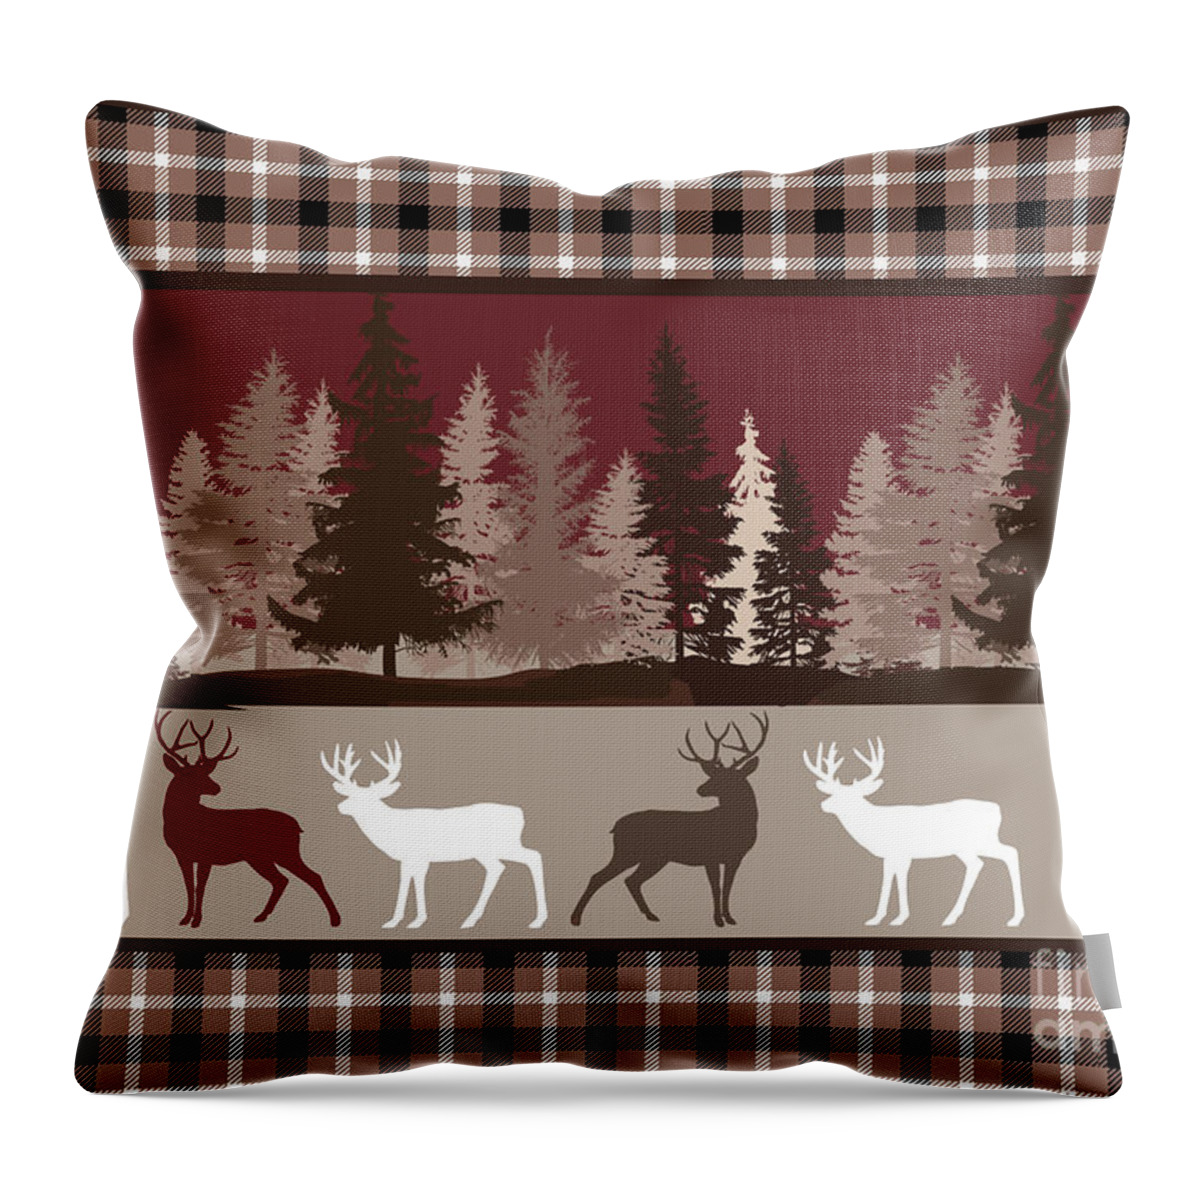 Deer Throw Pillow featuring the painting Forest Deer Lodge Plaid by Mindy Sommers